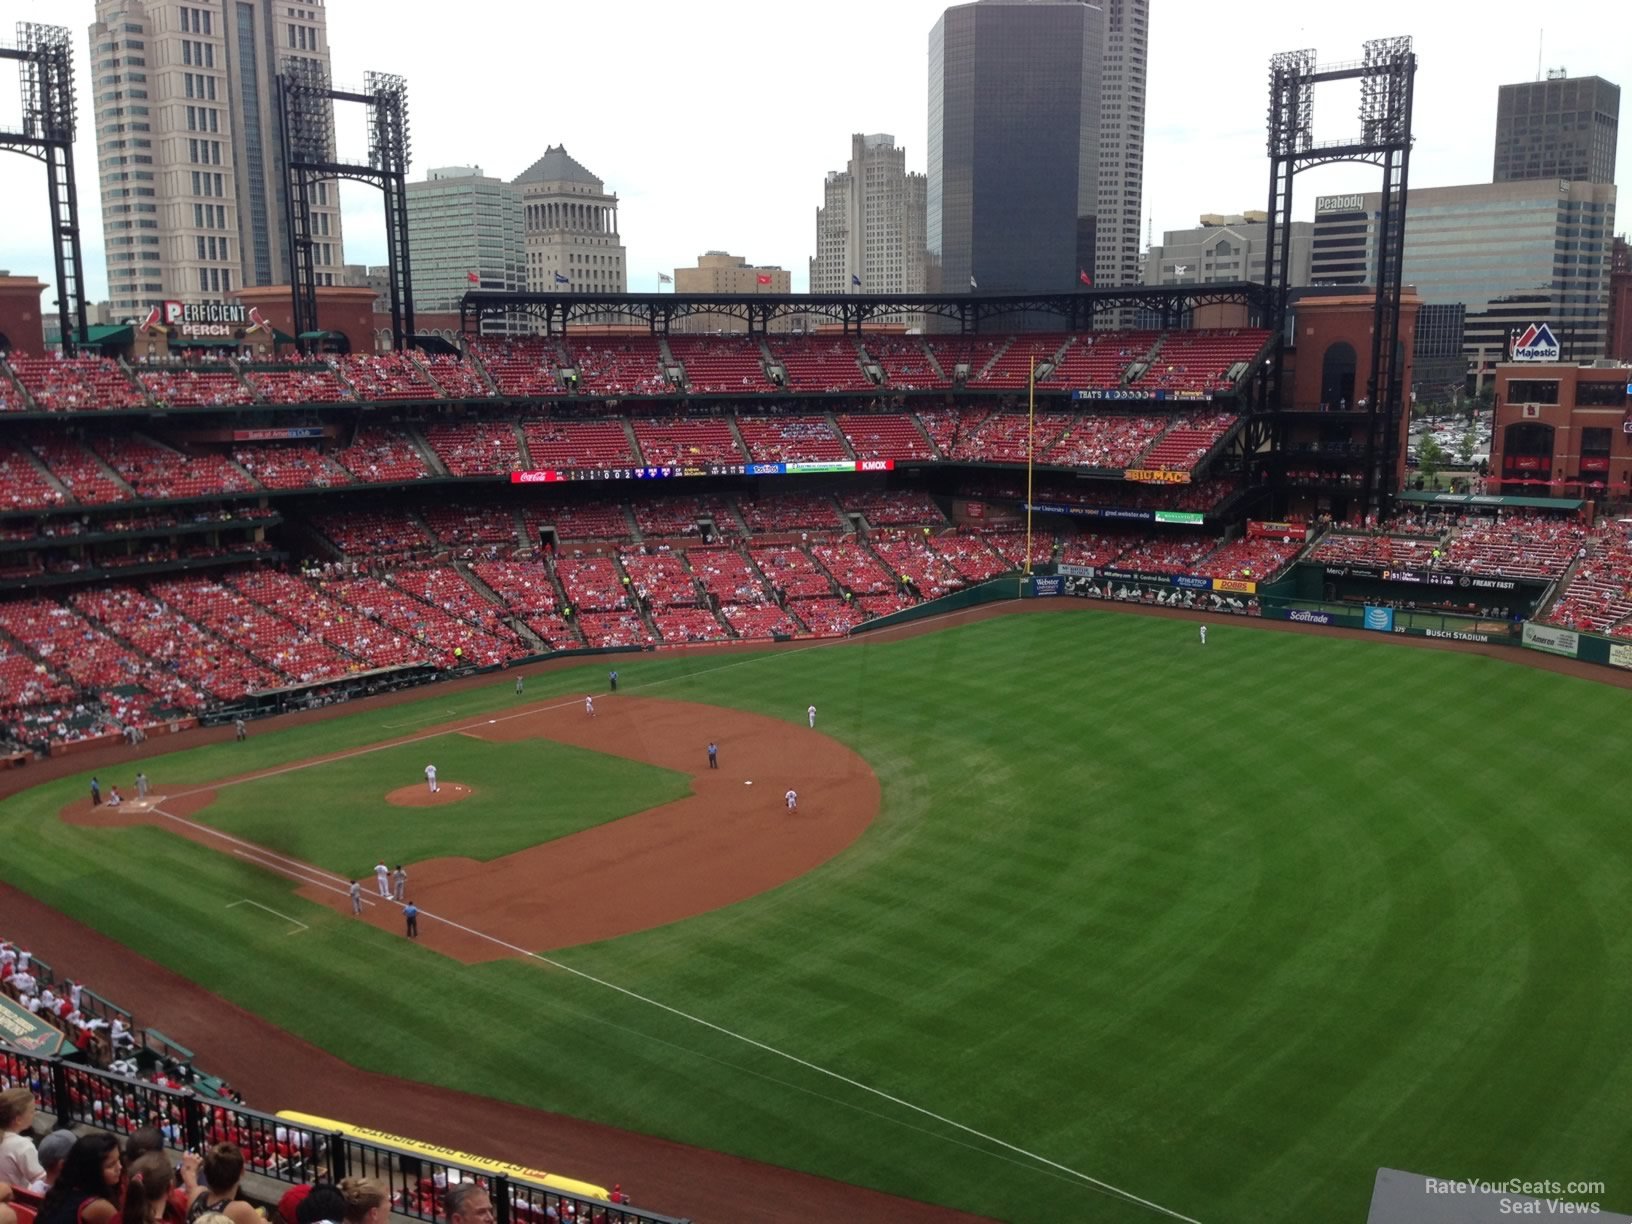 section 334, row 6 seat view  - busch stadium